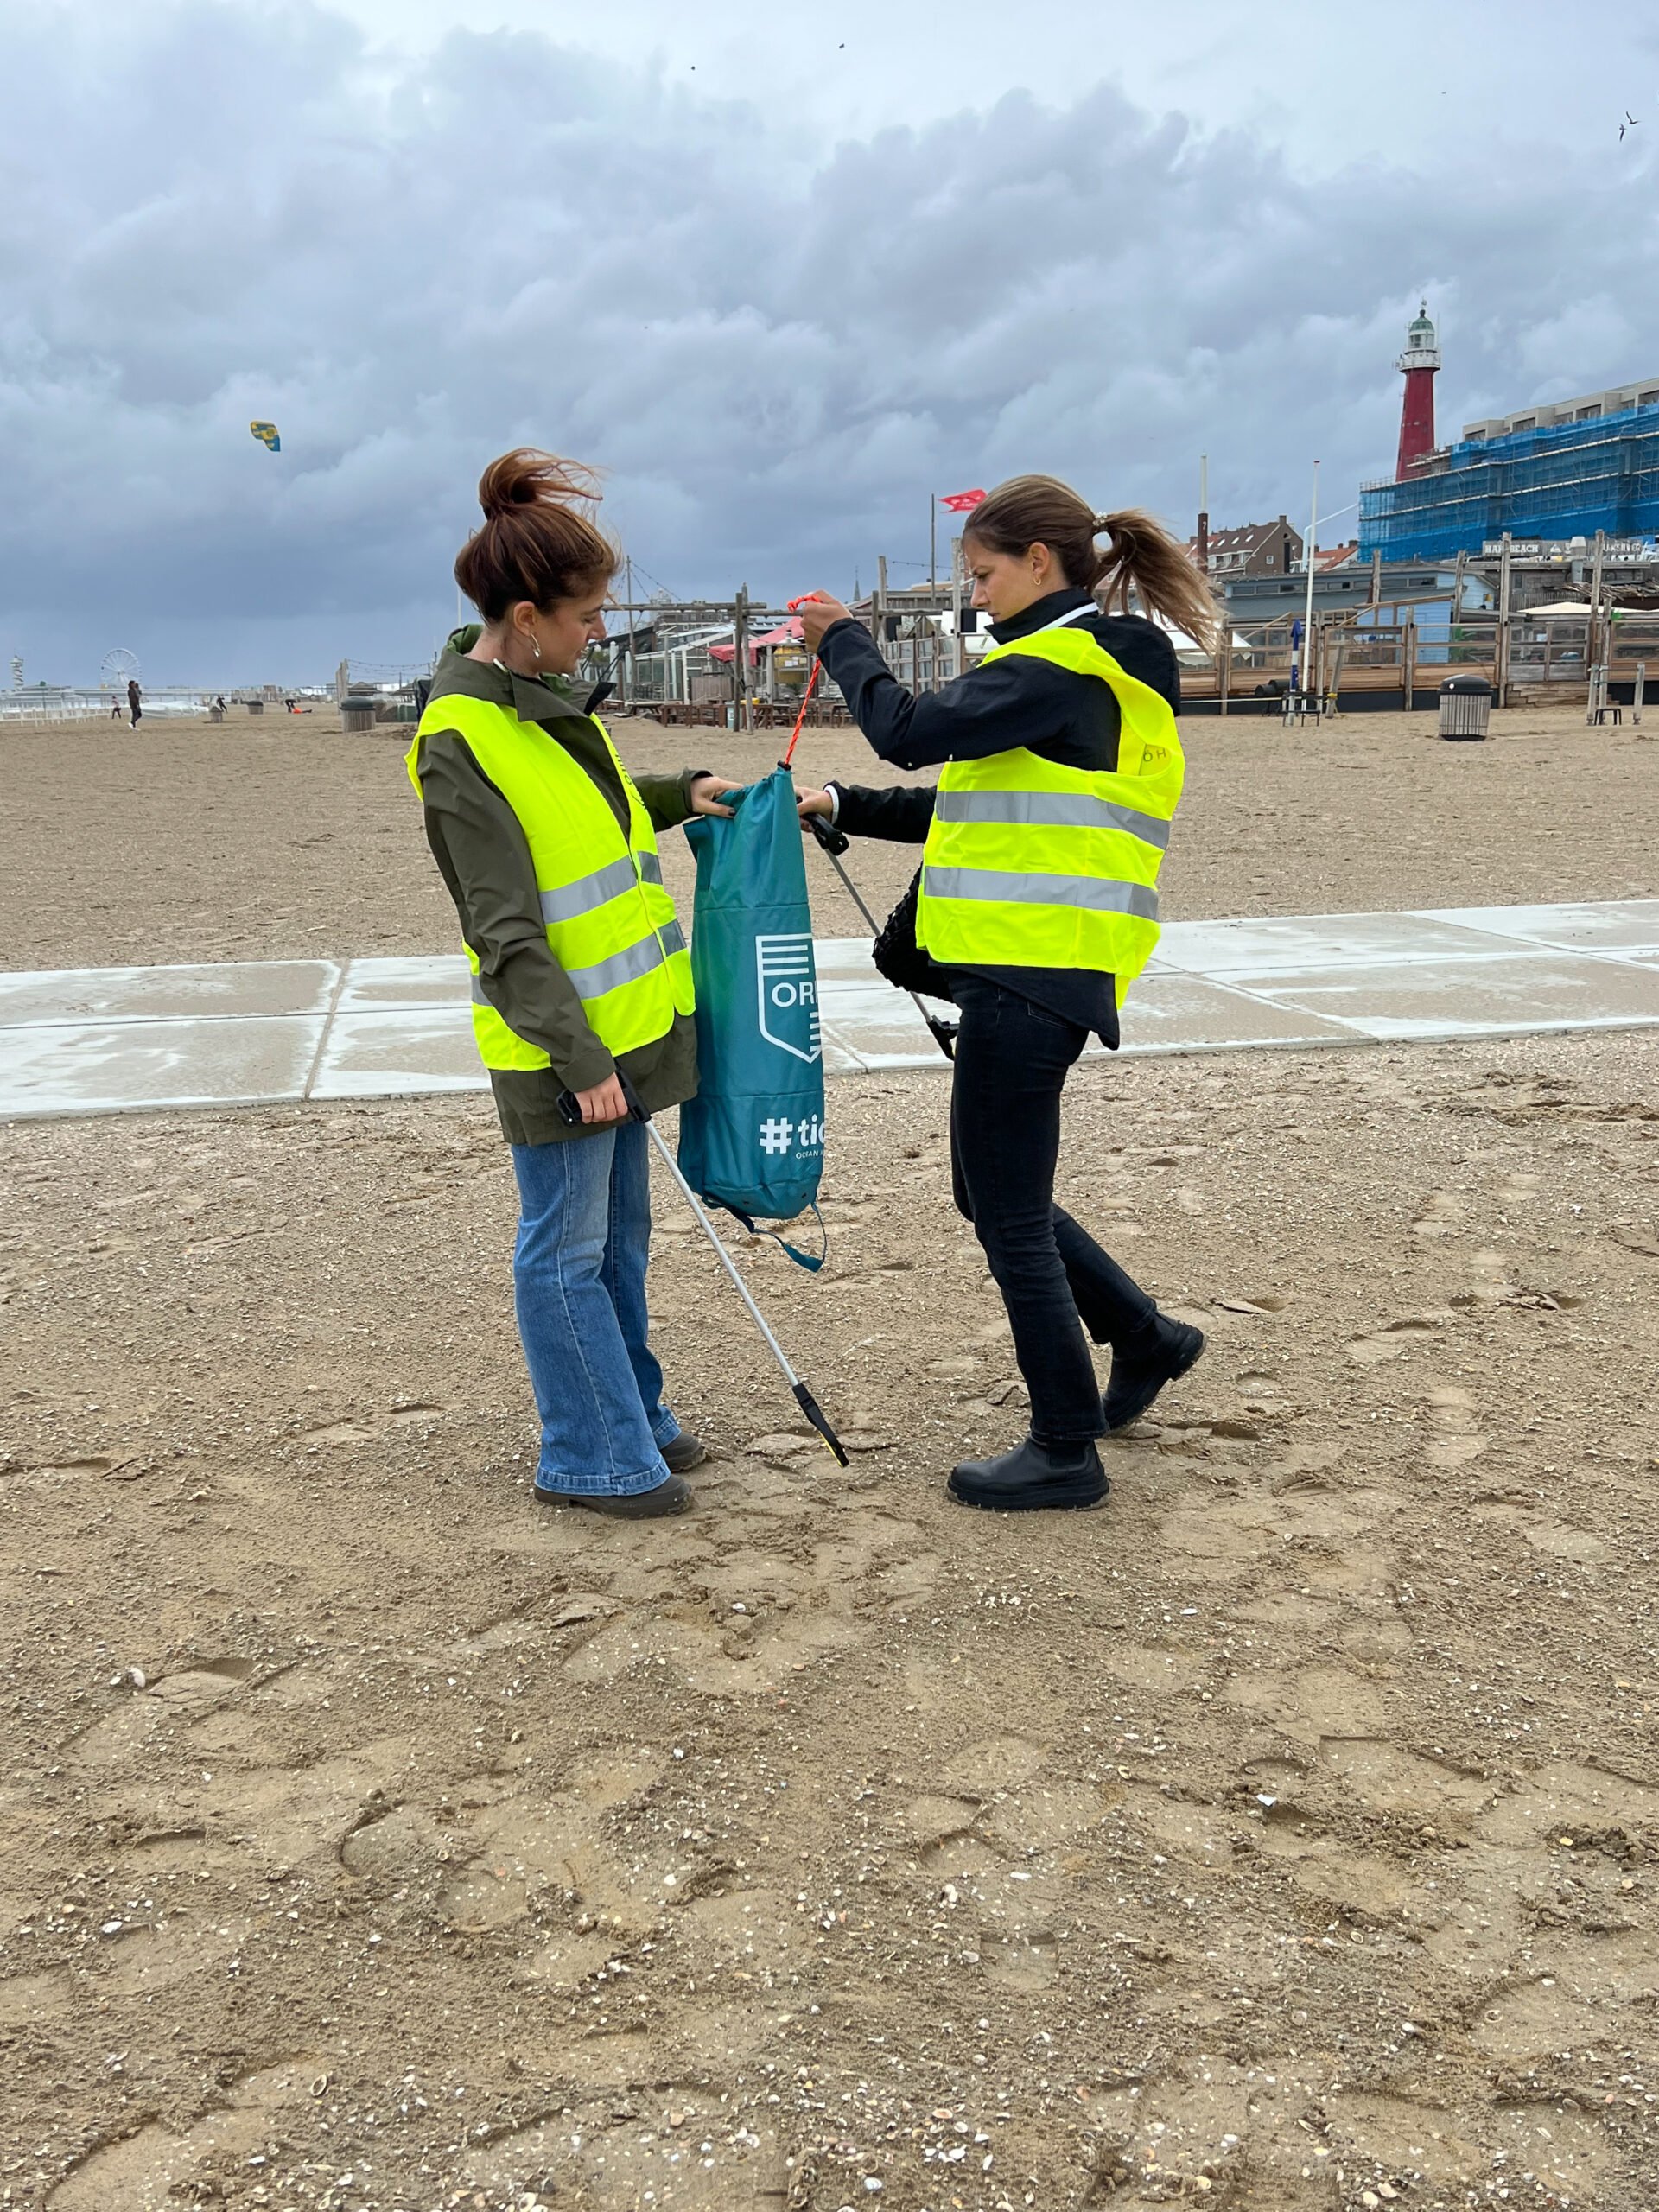 Campaign launched to clean up fishing litter from East Anglia's beaches